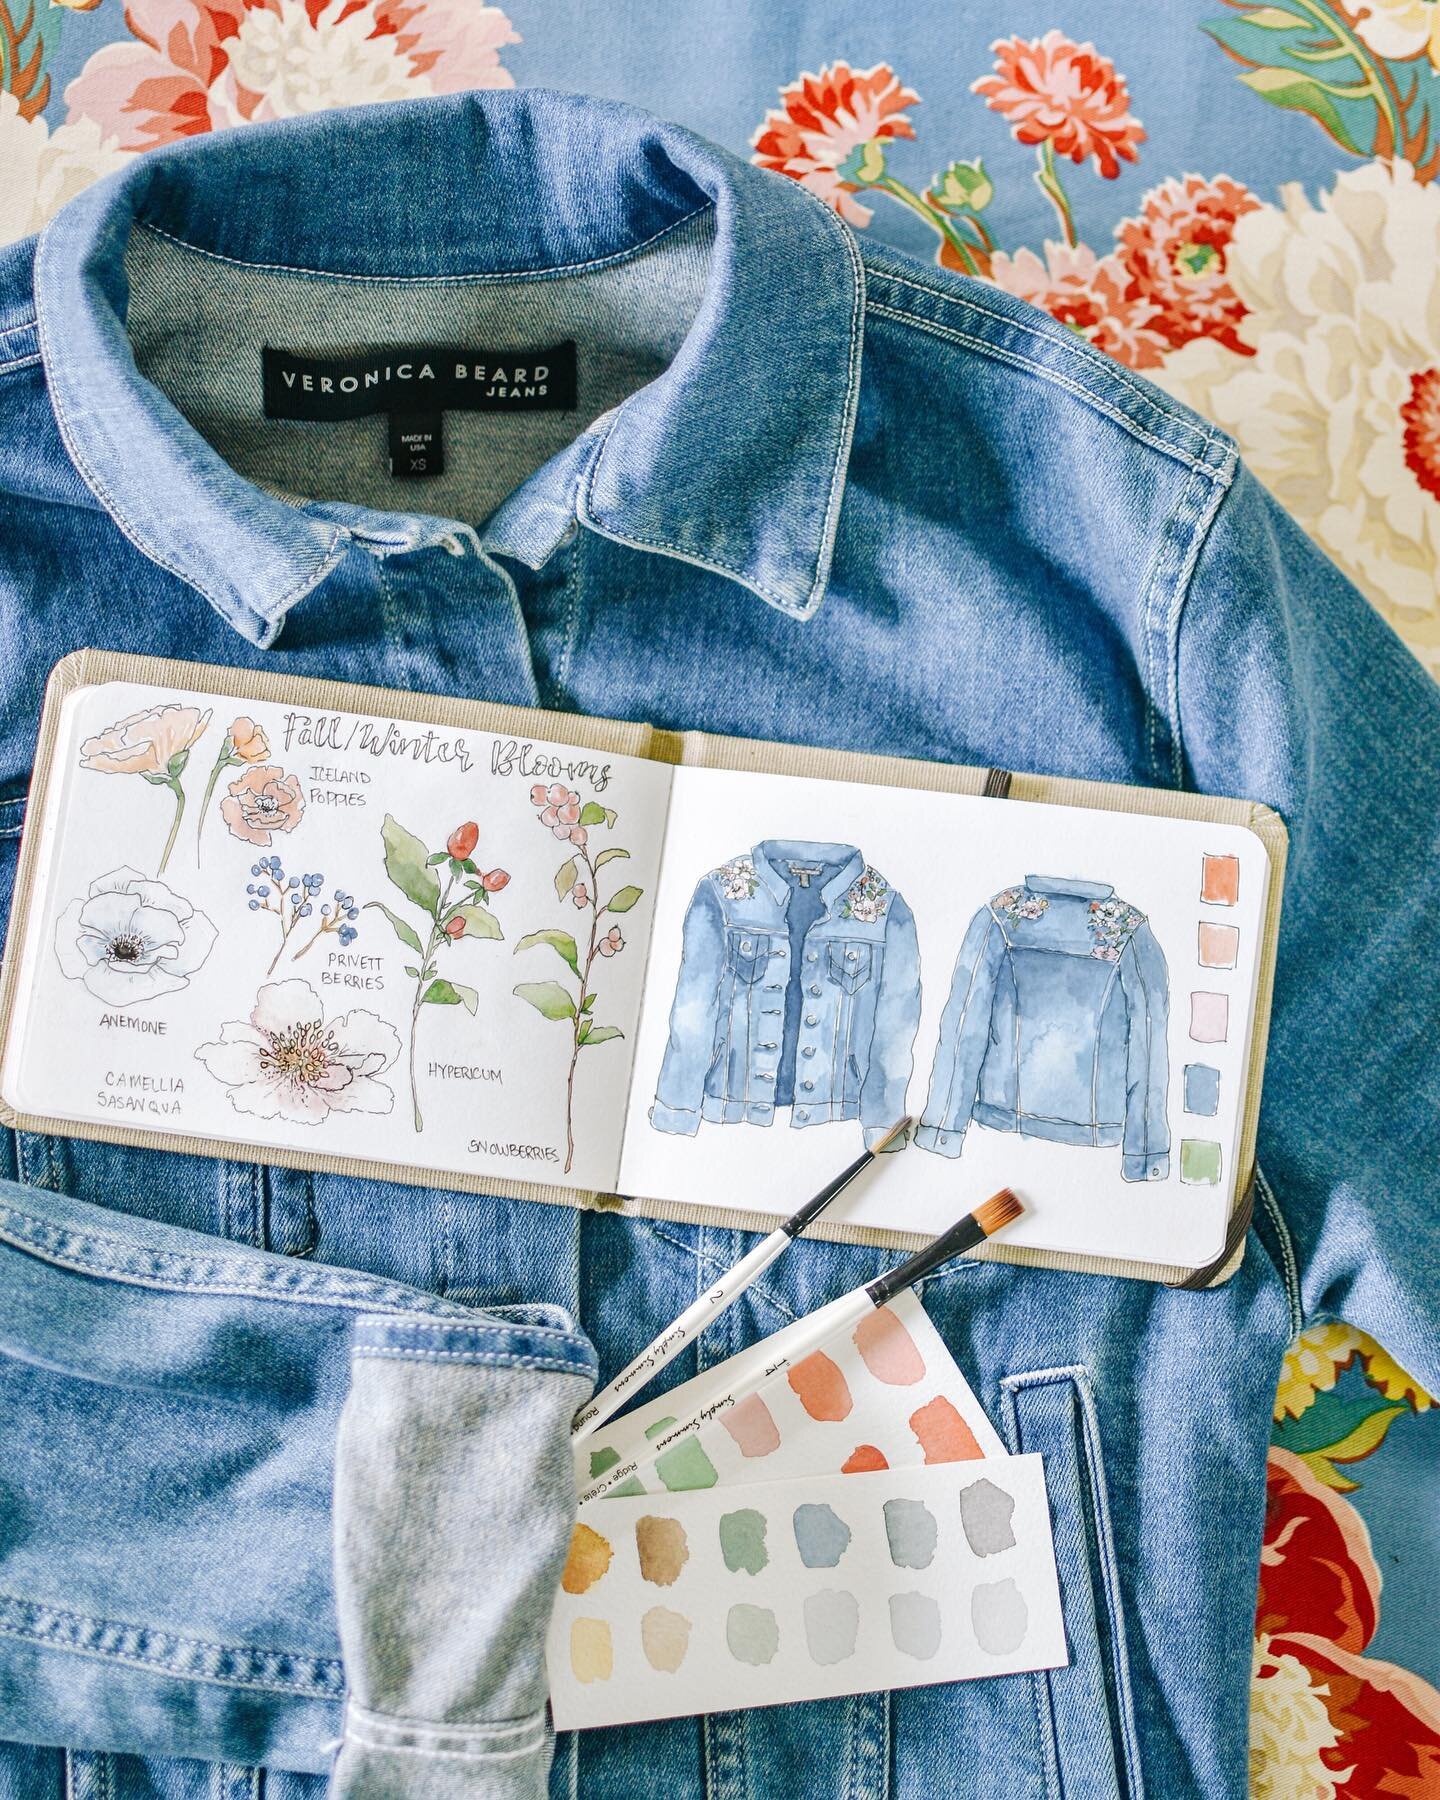 🖌Getting decorative with @veronicabeard denim!👕
Step 1: Preliminary ink/watercolor sketch to get ideas flowing! 🎨
Theme: Fall/winter blooms and berries🍂 Stay tuned for more hand painted projects ahead this season!✍️ #merhansonartanddesign